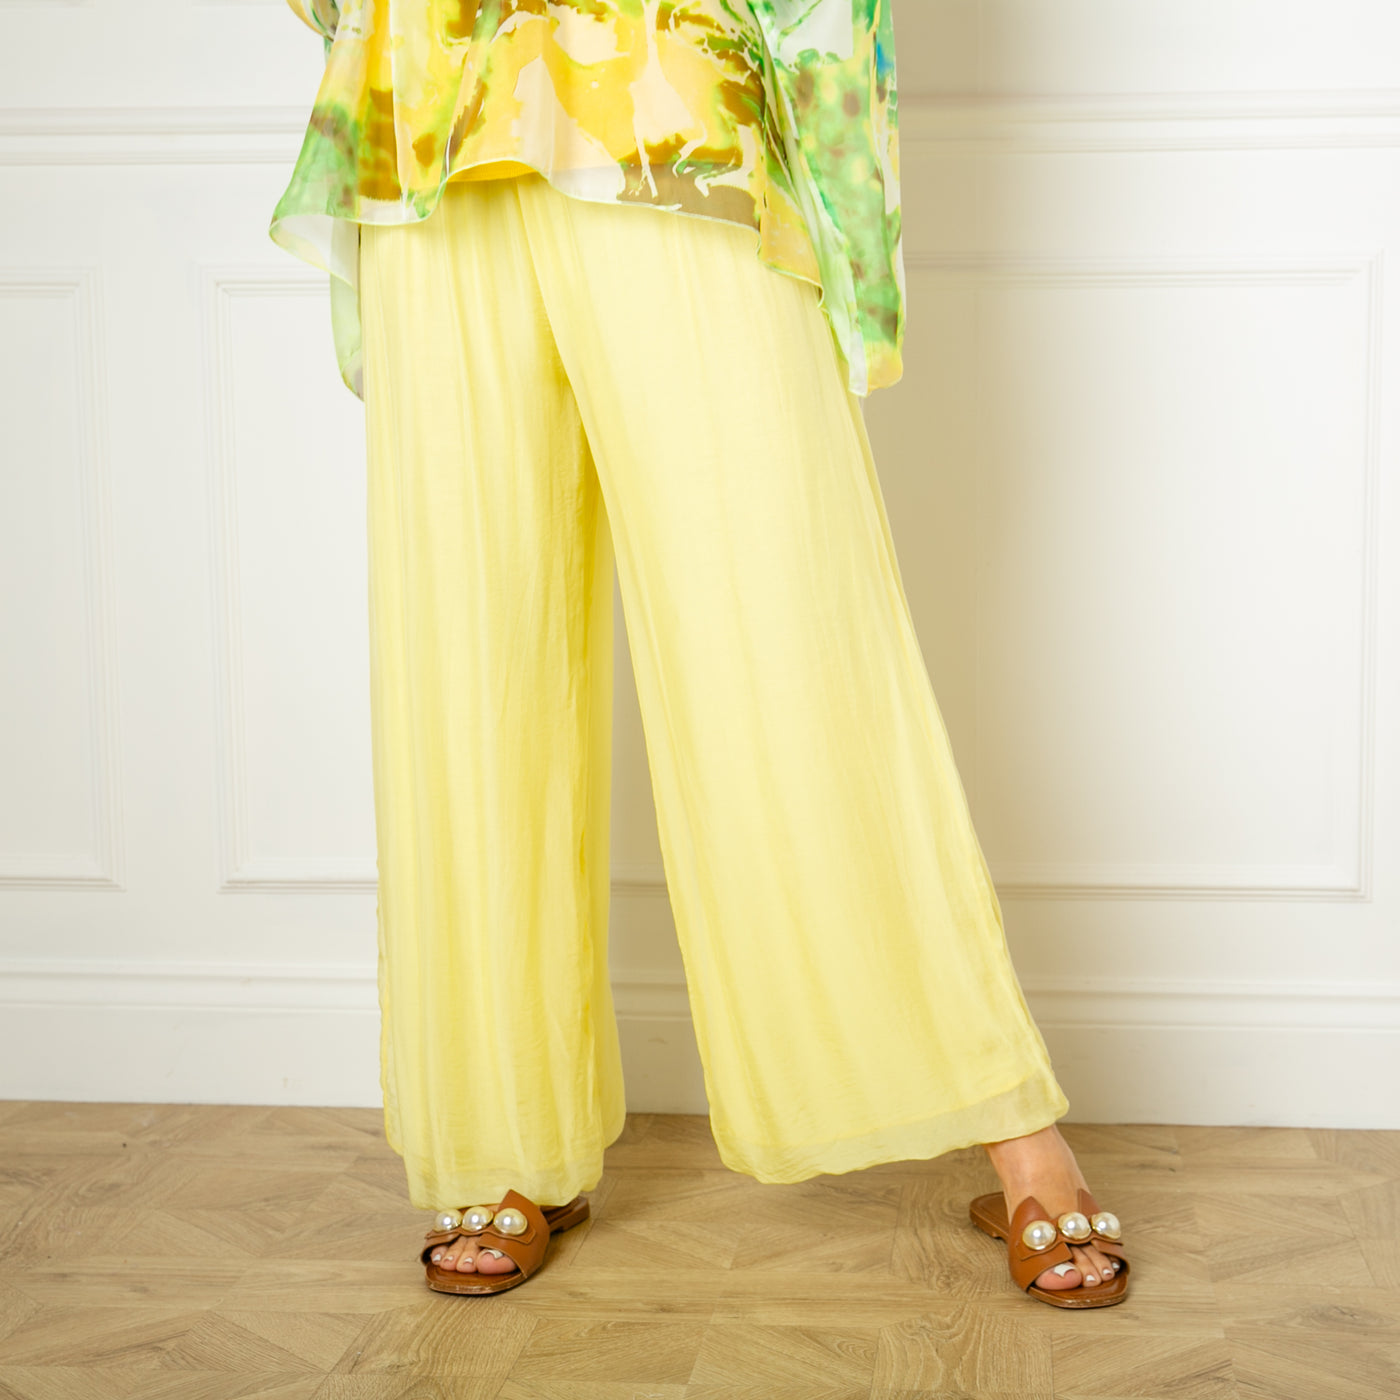 The yellow Silk Blend Trousers, made from a beautiful silk material with a stretchy jersey lining underneath